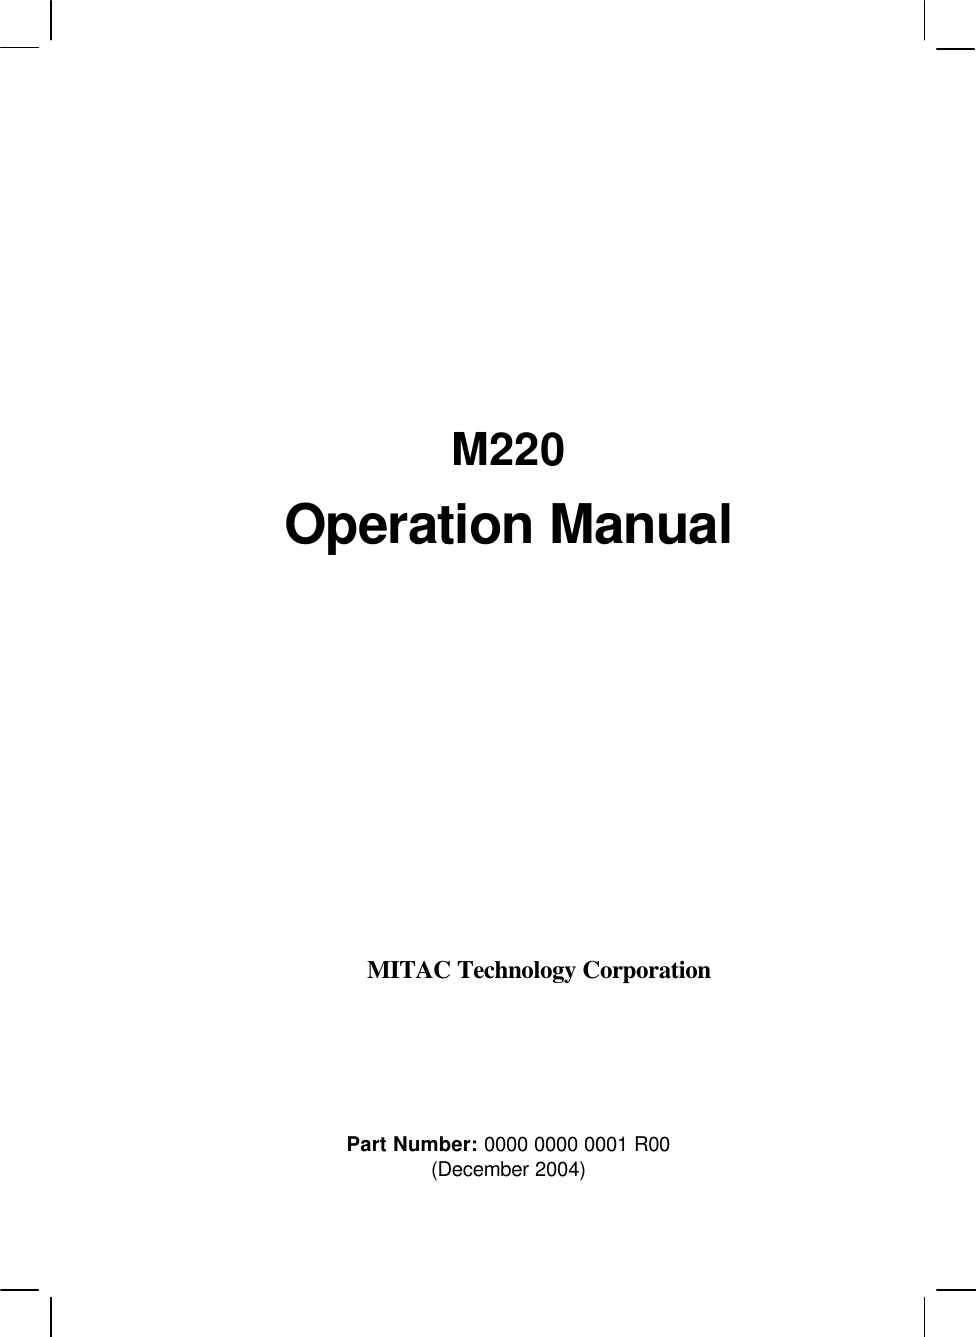          M220 Operation Manual          MITAC Technology Corporation    Part Number: 0000 0000 0001 R00 (December 2004) 